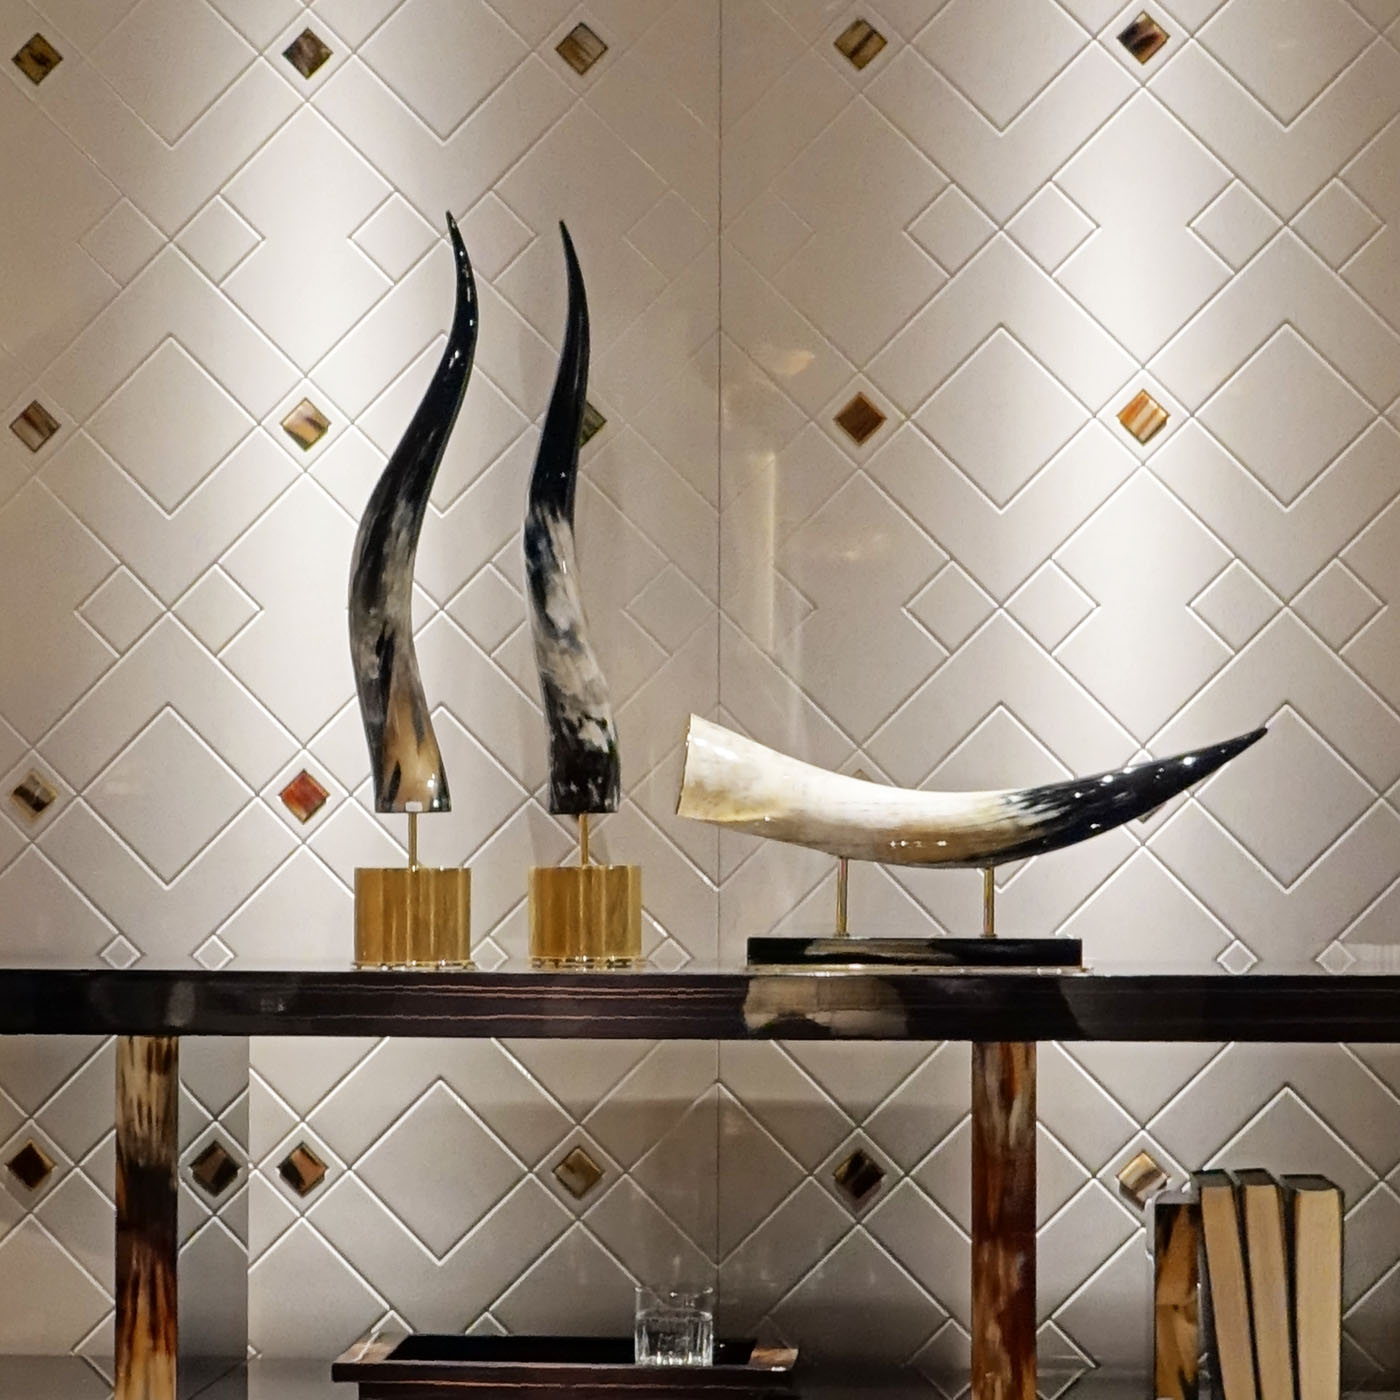 Sculptures - Cigno horizontal sculpture in horn and glossy black lacquered wood - ambiance picture - Arcahorn